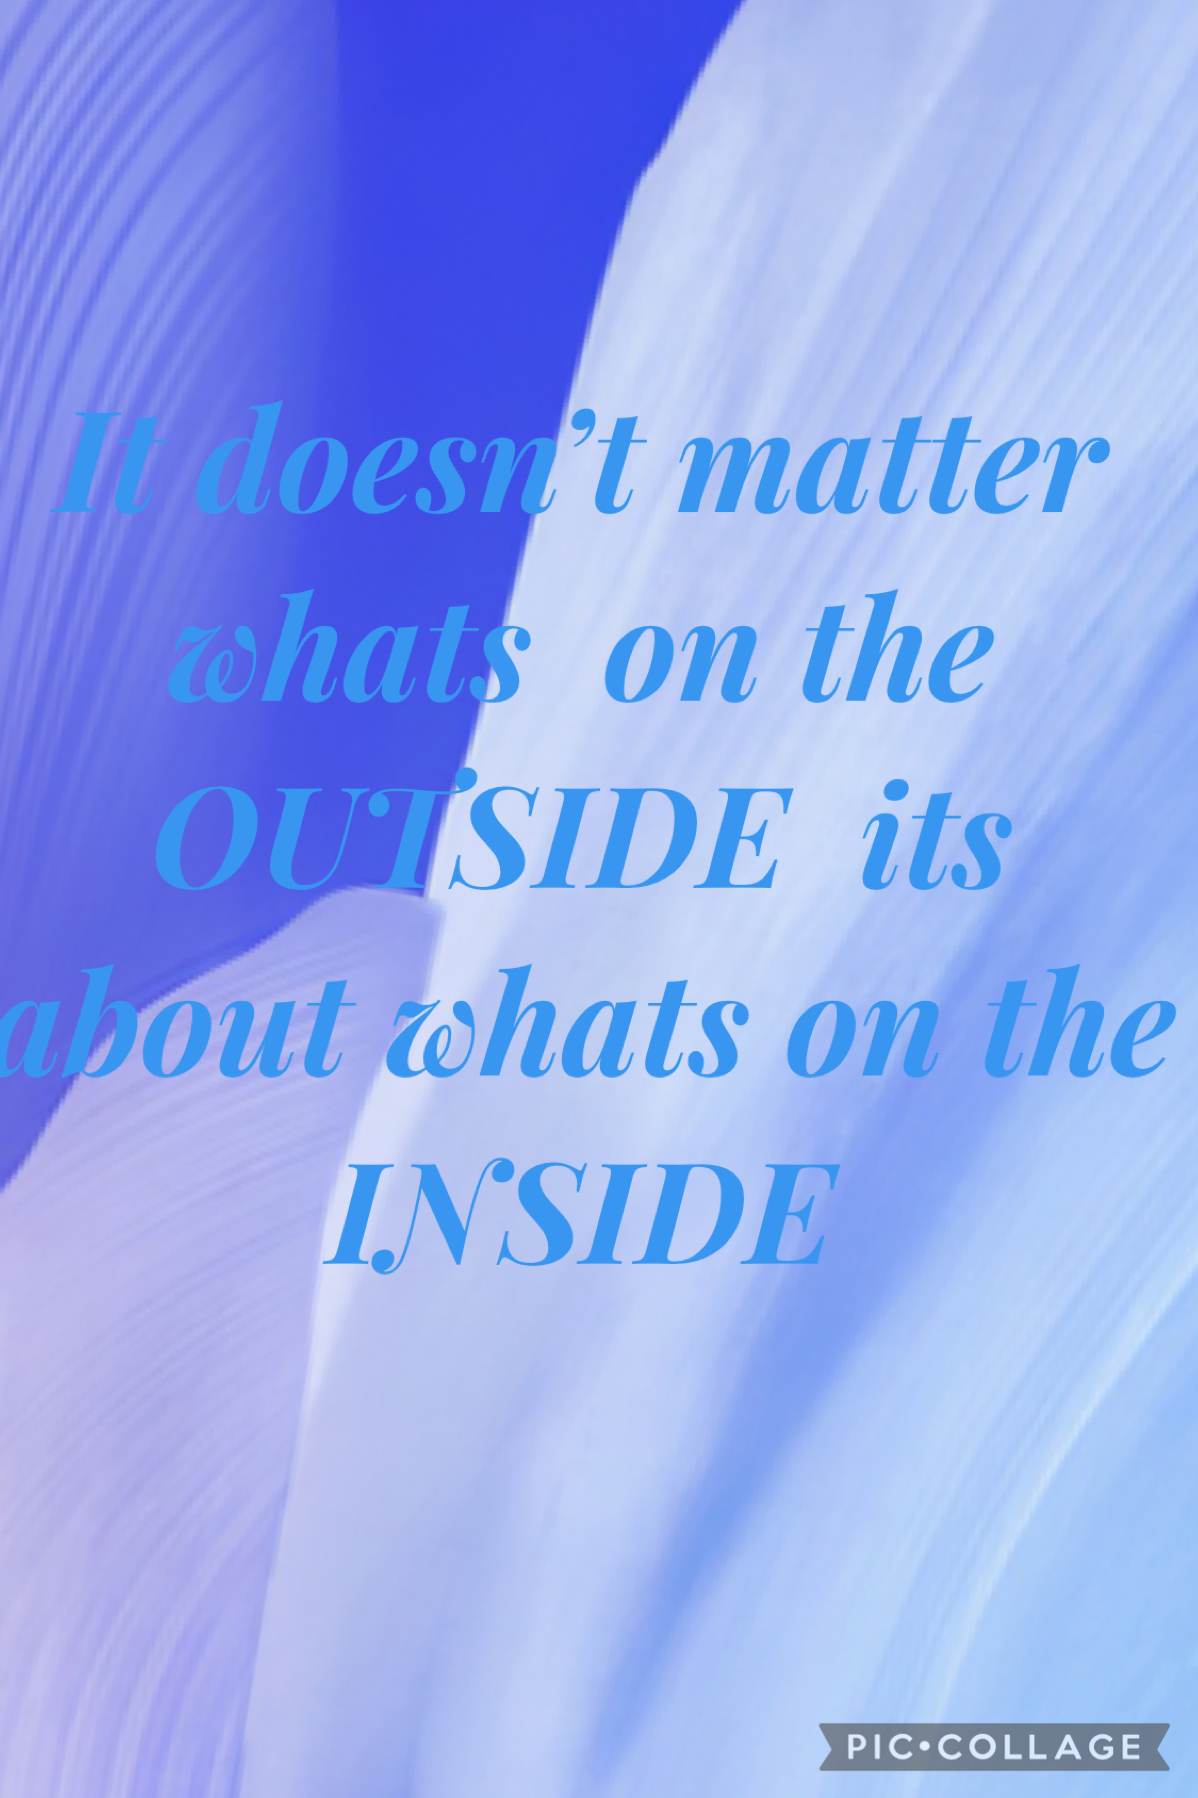 It doesn’t matter about whats on the outside it matters about whats on the inside that counts